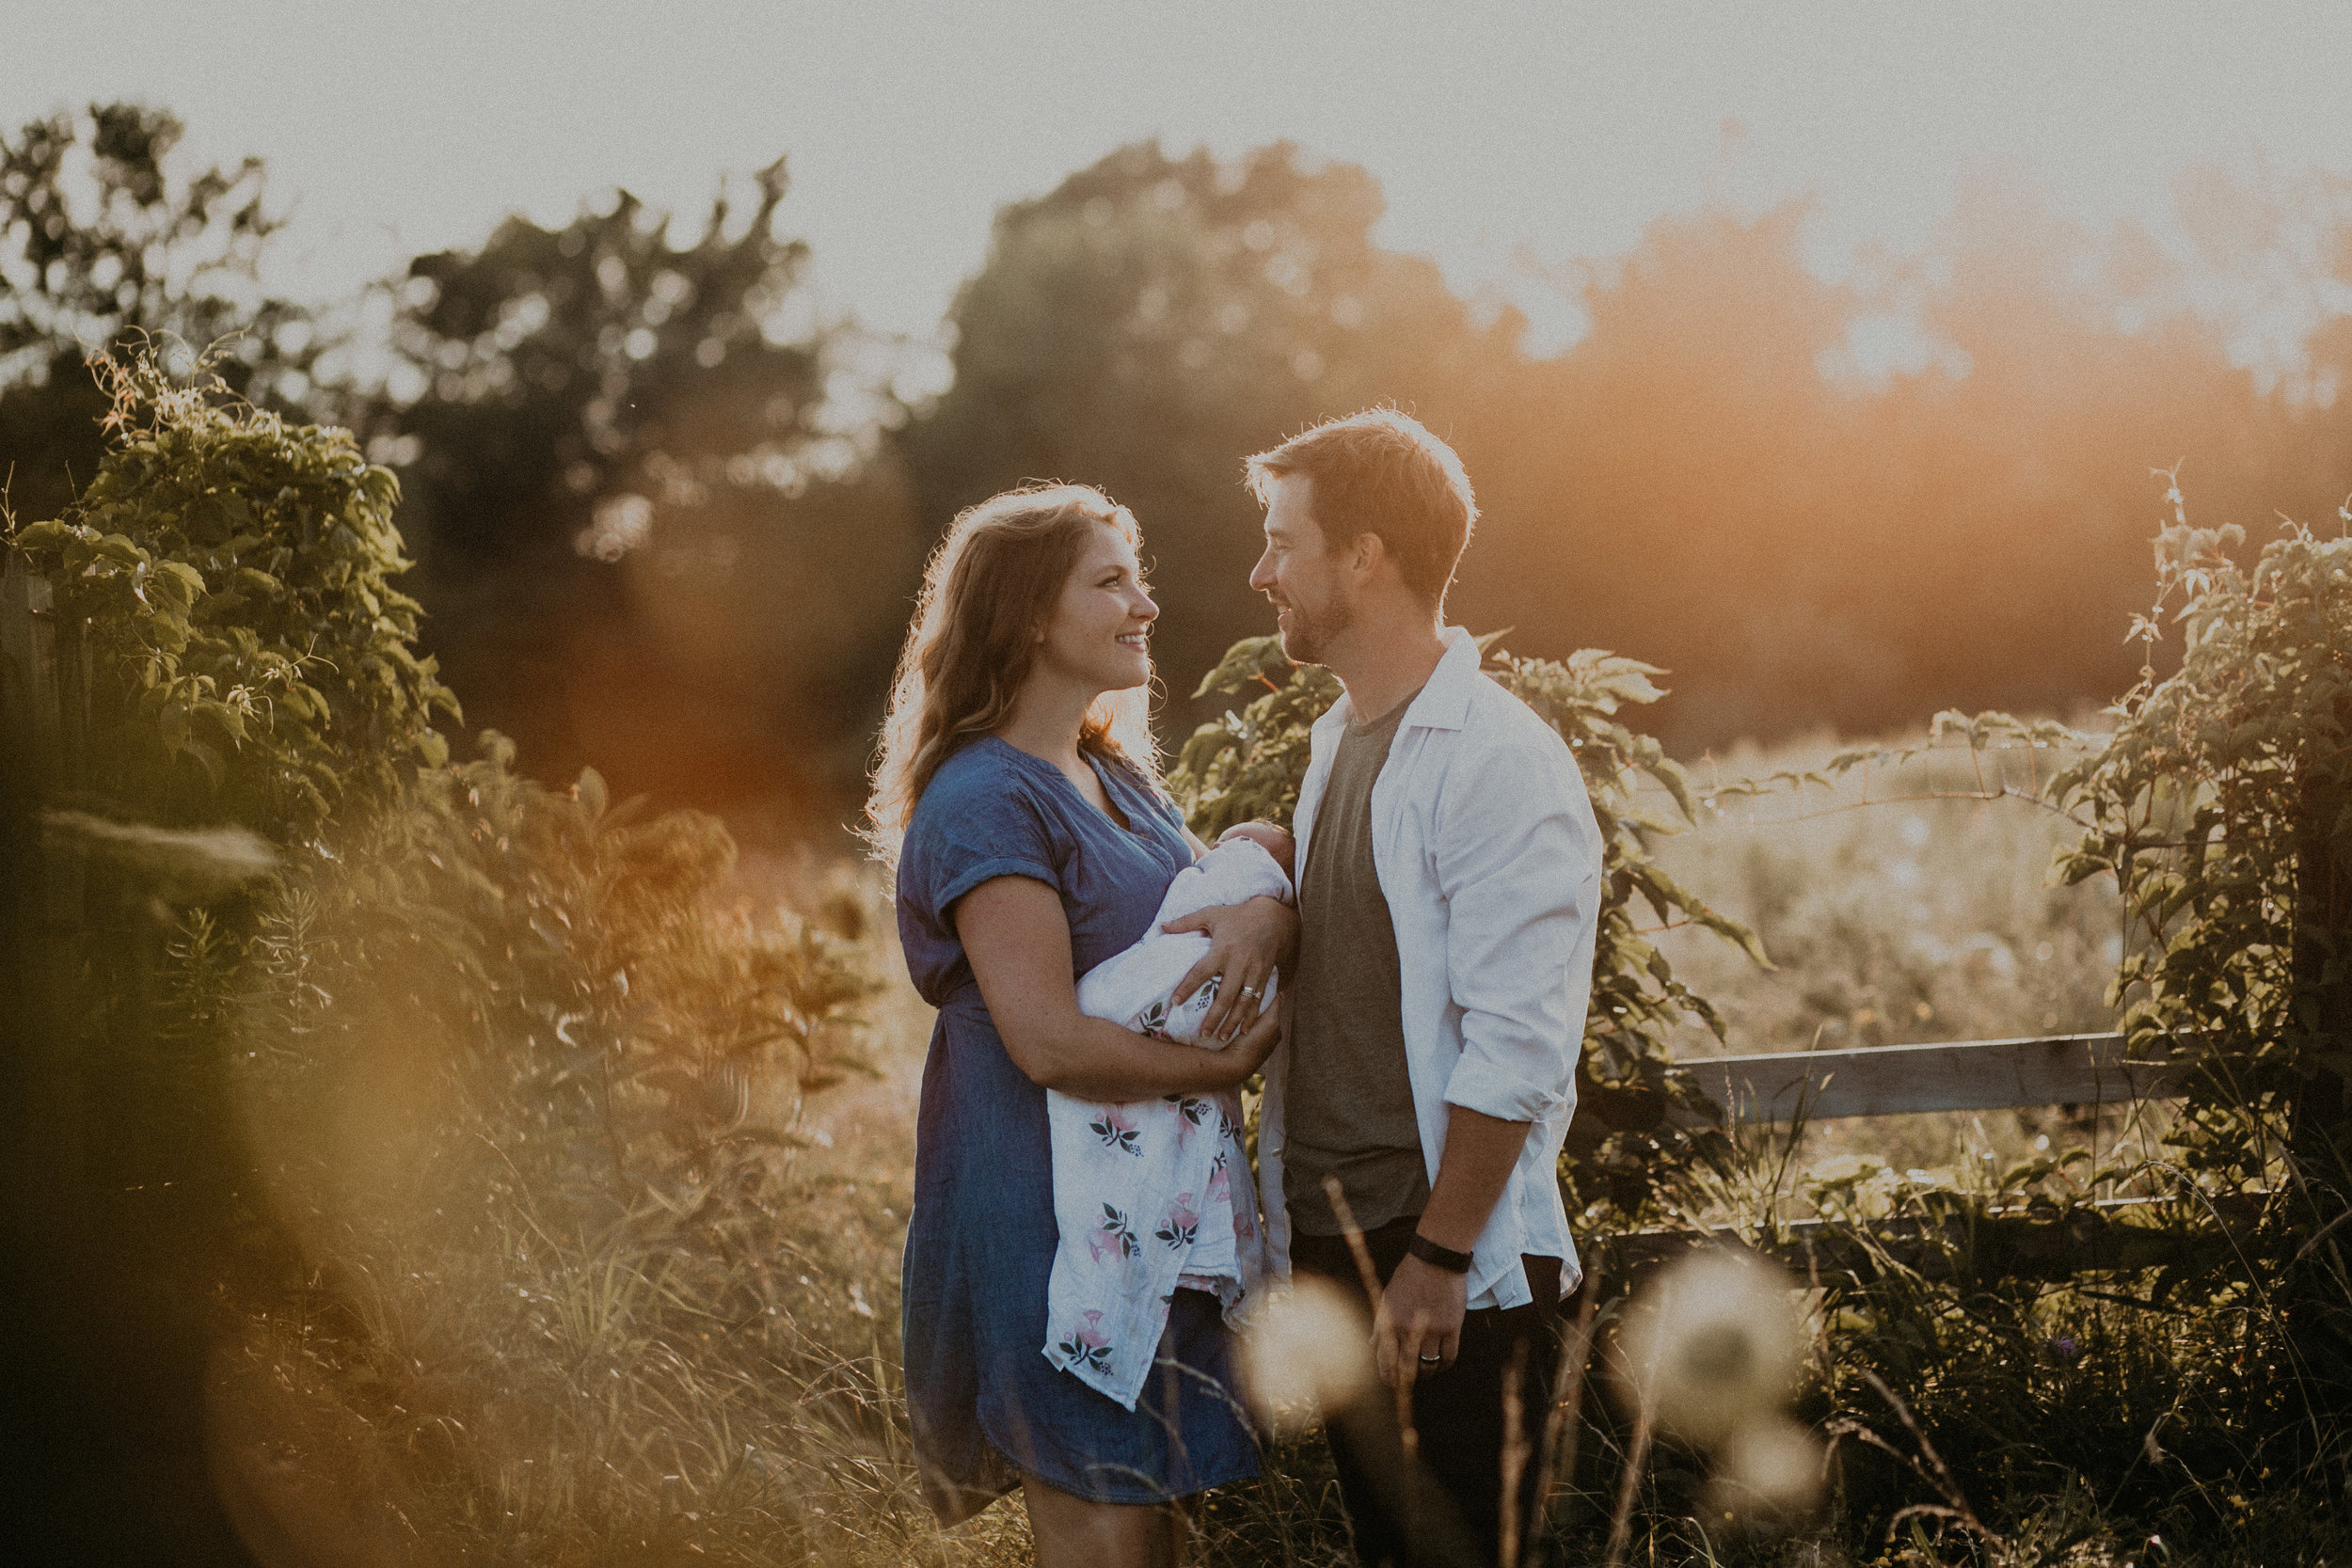  Lens flare on portrait of family of 3 during golden hour in Wisconsin  